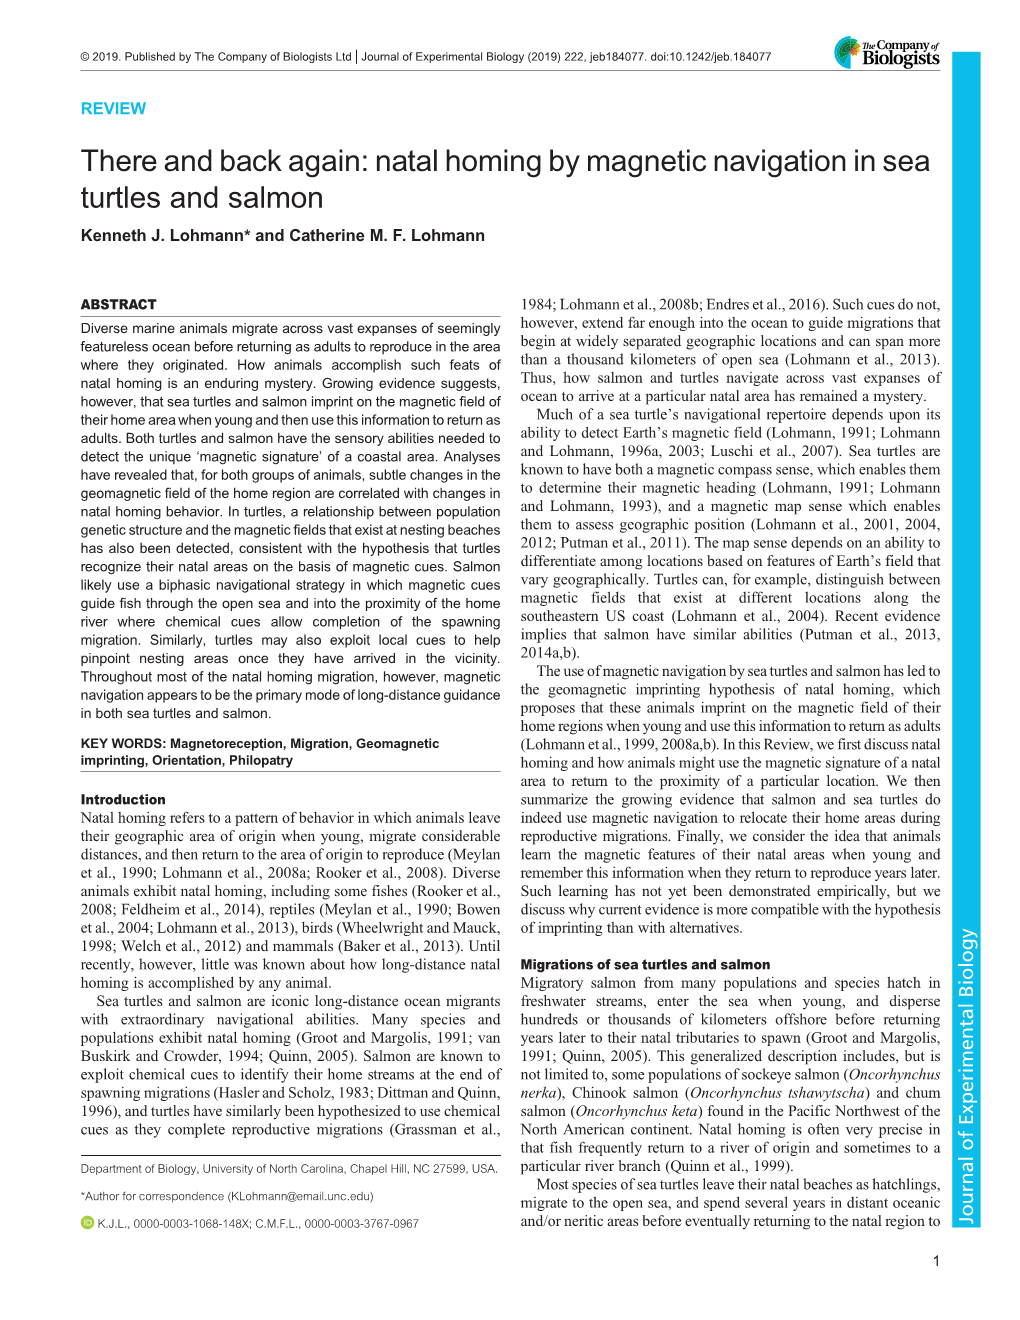 Natal Homing by Magnetic Navigation in Sea Turtles and Salmon Kenneth J